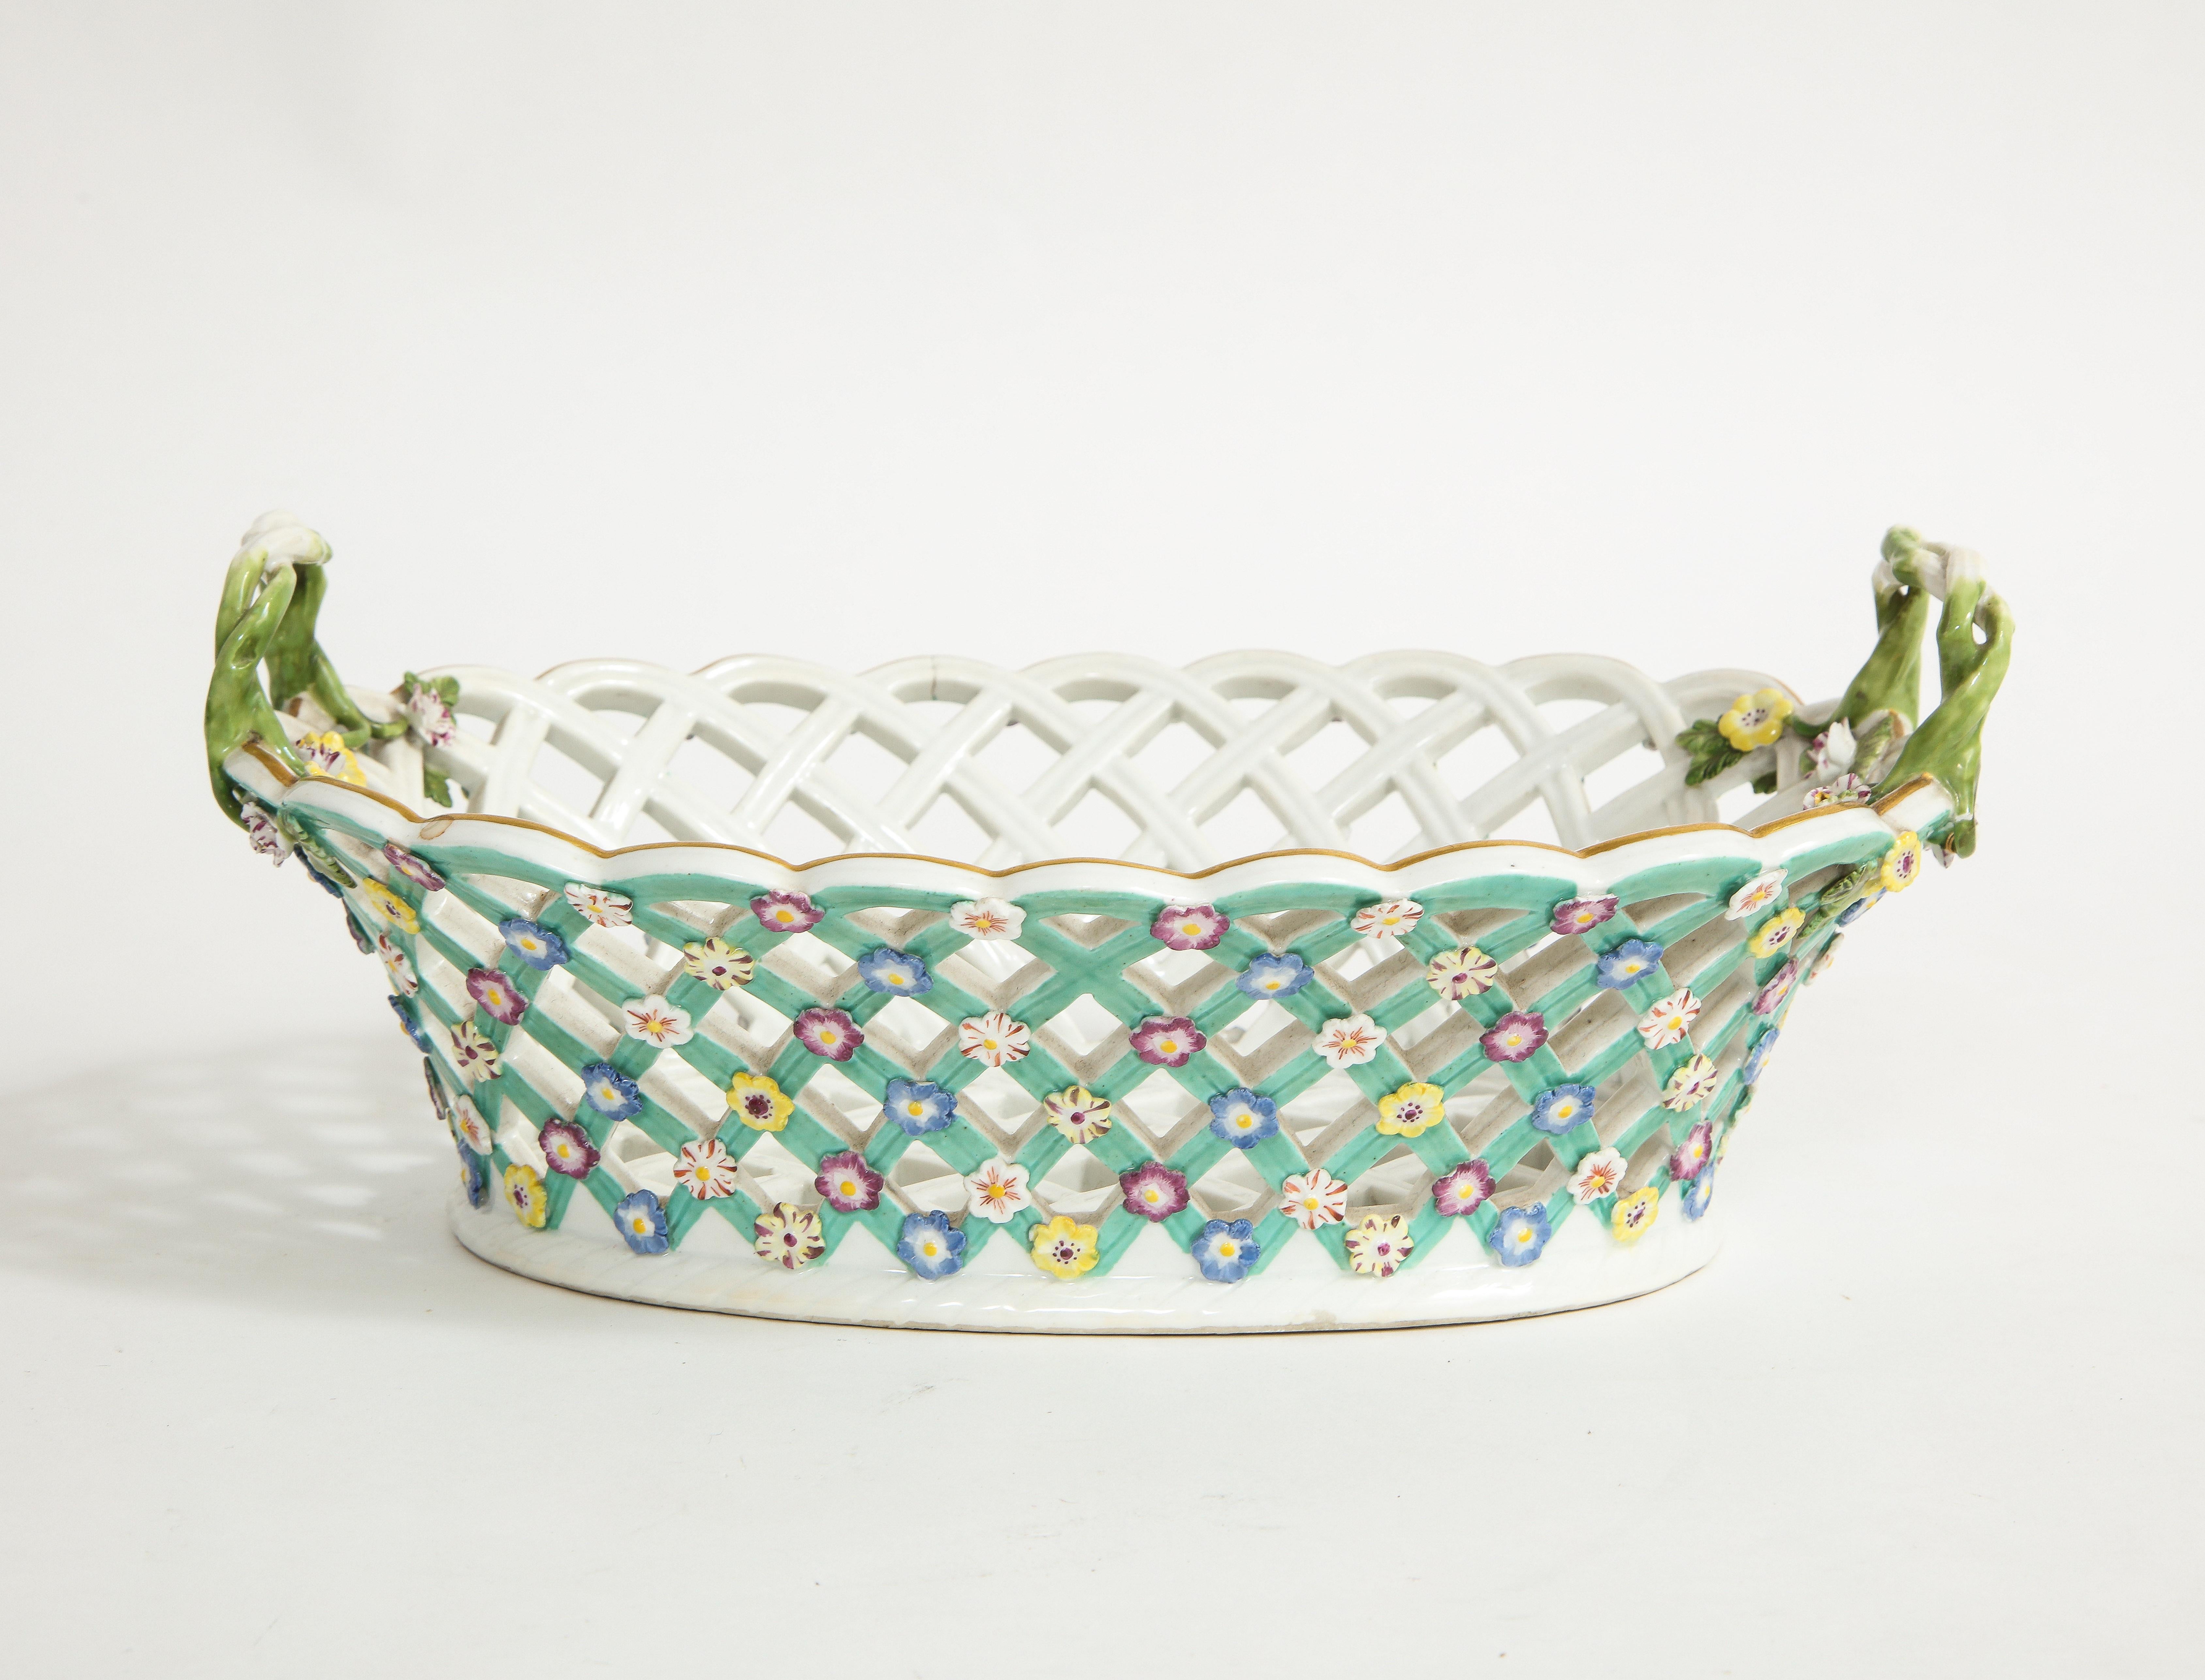 An incredible 18th century Meissen Porcelain lattice filigree reticulated basket with vine handles and encrusted flowers. This piece is very rare, especially in this condition with hand-painted applied flowers and turquoise blue on the exterior of